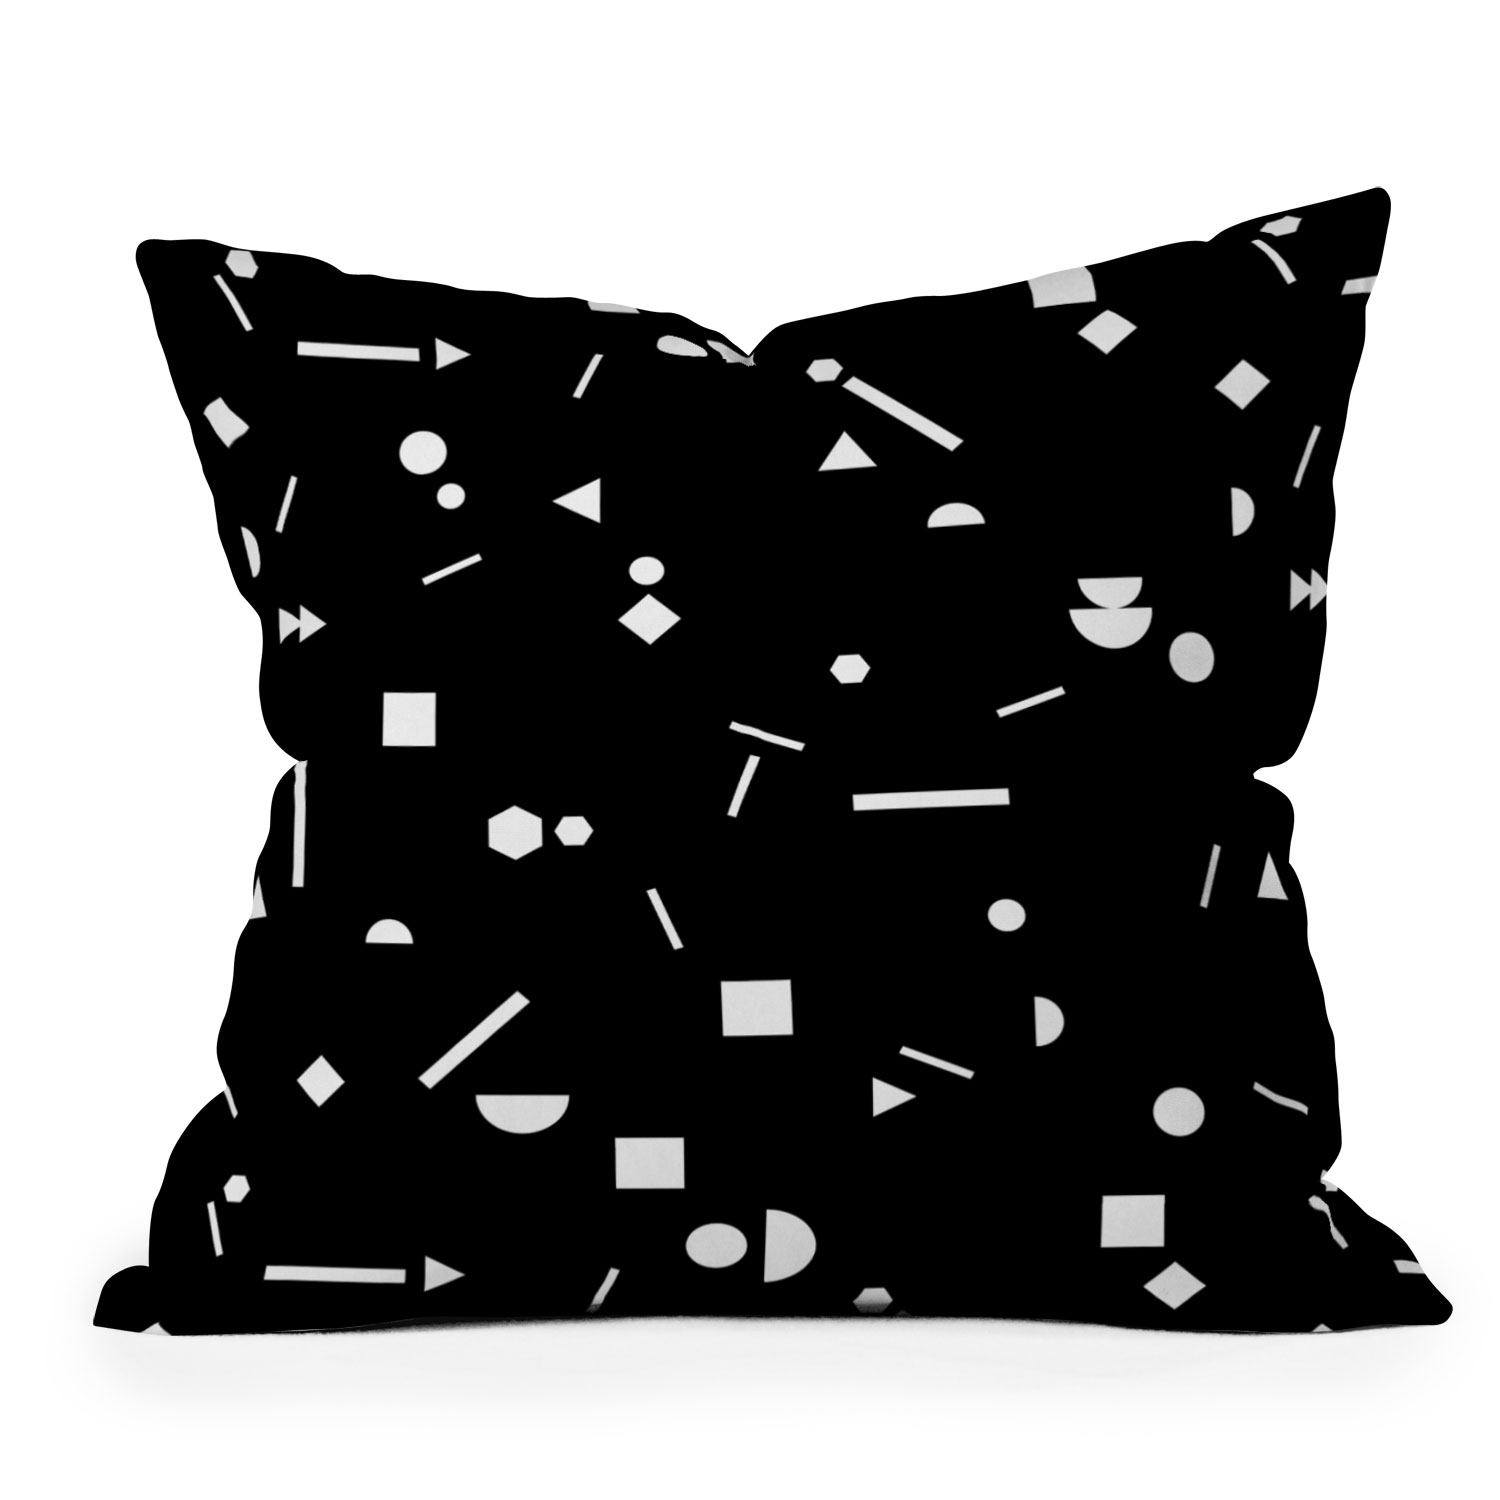 My Favorite Pattern 3 Black by Mareike Boehmer - Outdoor Throw Pillow 16" x 16" - Image 0